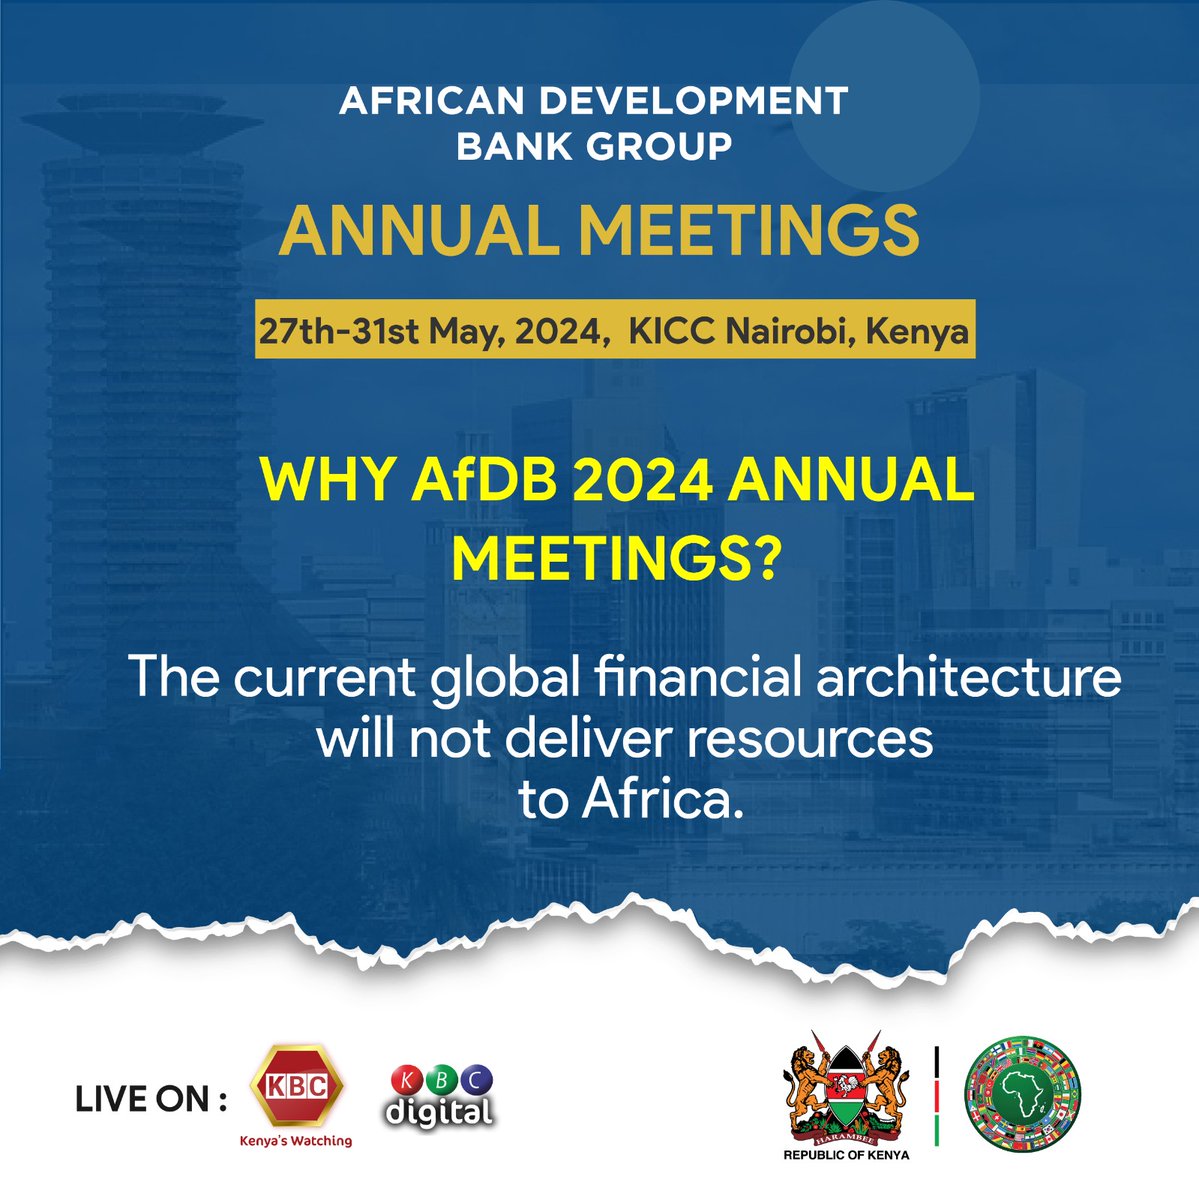 WHY AfDB 2024 ANNUAL MEETINGS? The current global financial architecture will not deliver resources to Africa. Join us to discuss and shape the future of Africa's development. #KBCniYetu. #AfDBAM2024